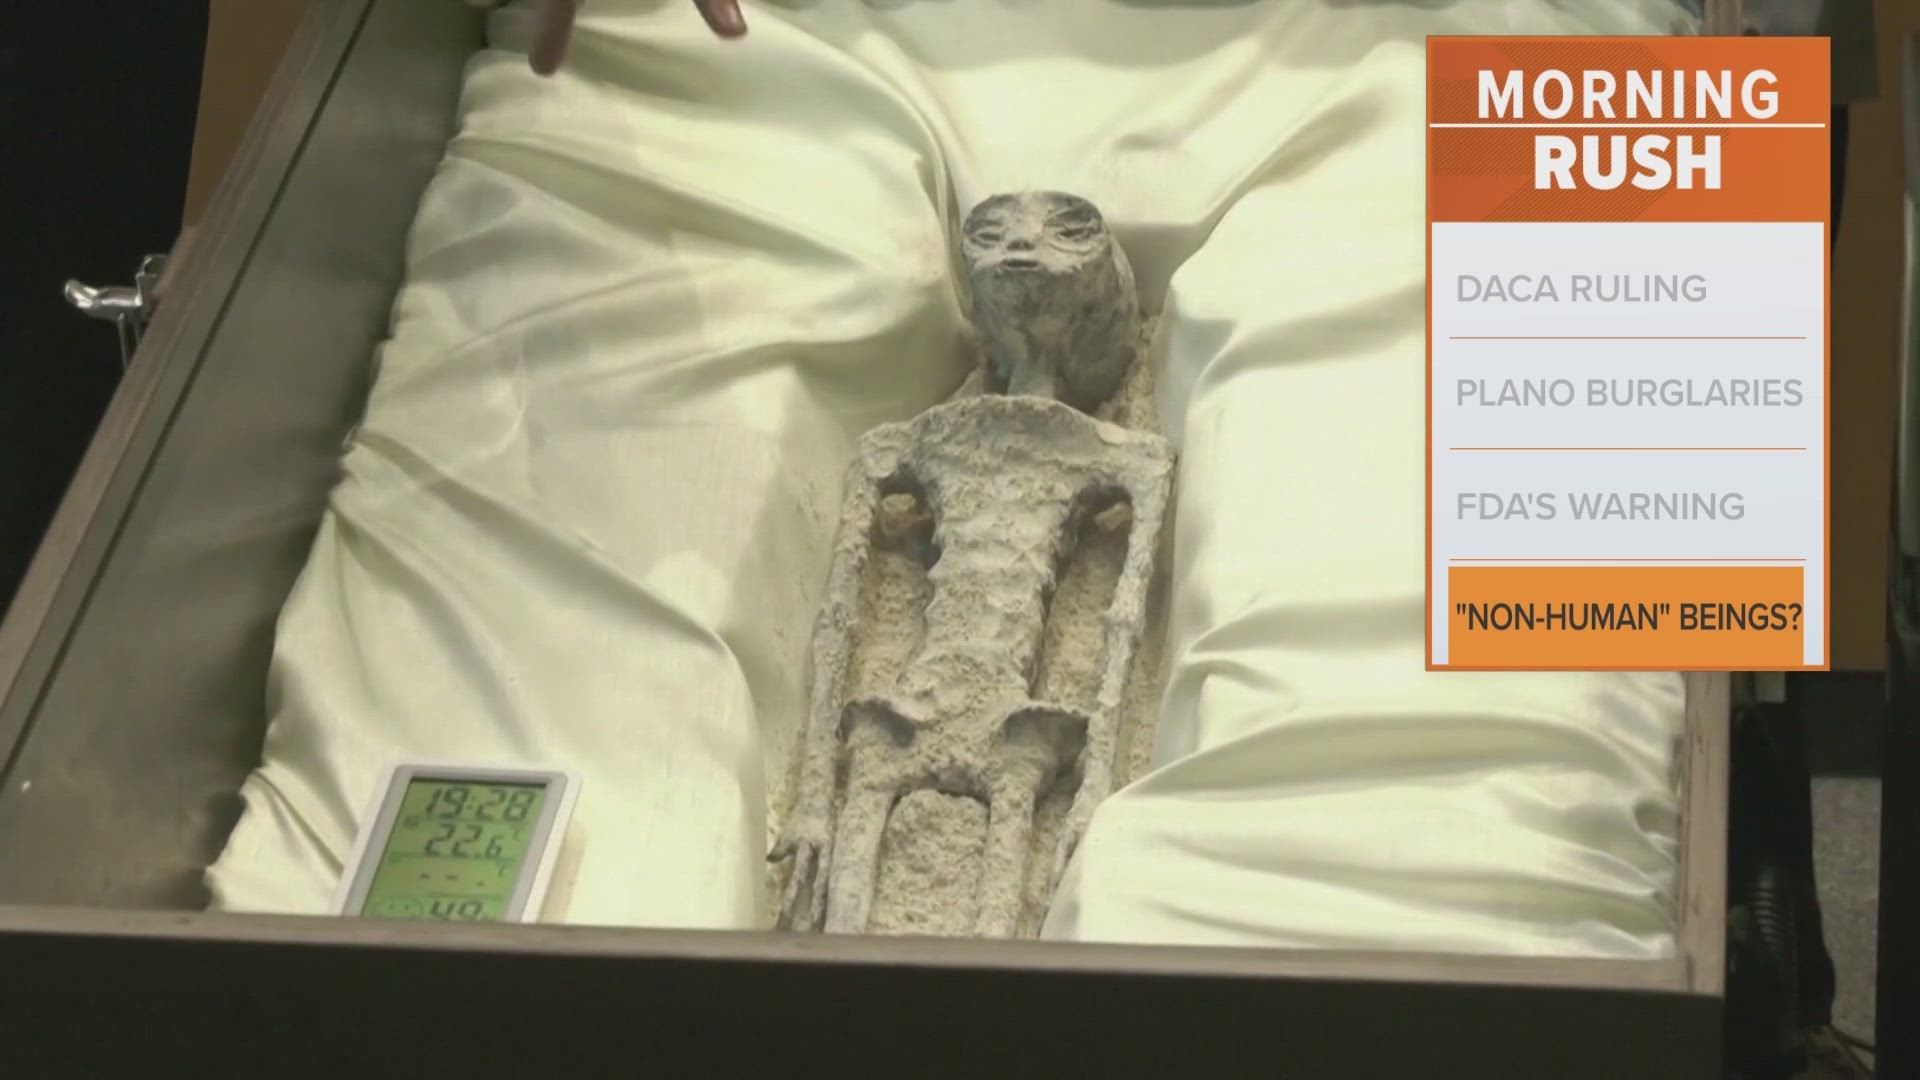 A journalist presented two boxes with supposed mummies found in Peru. He warned that he didn't want to refer to them as “extraterrestrials” just yet.